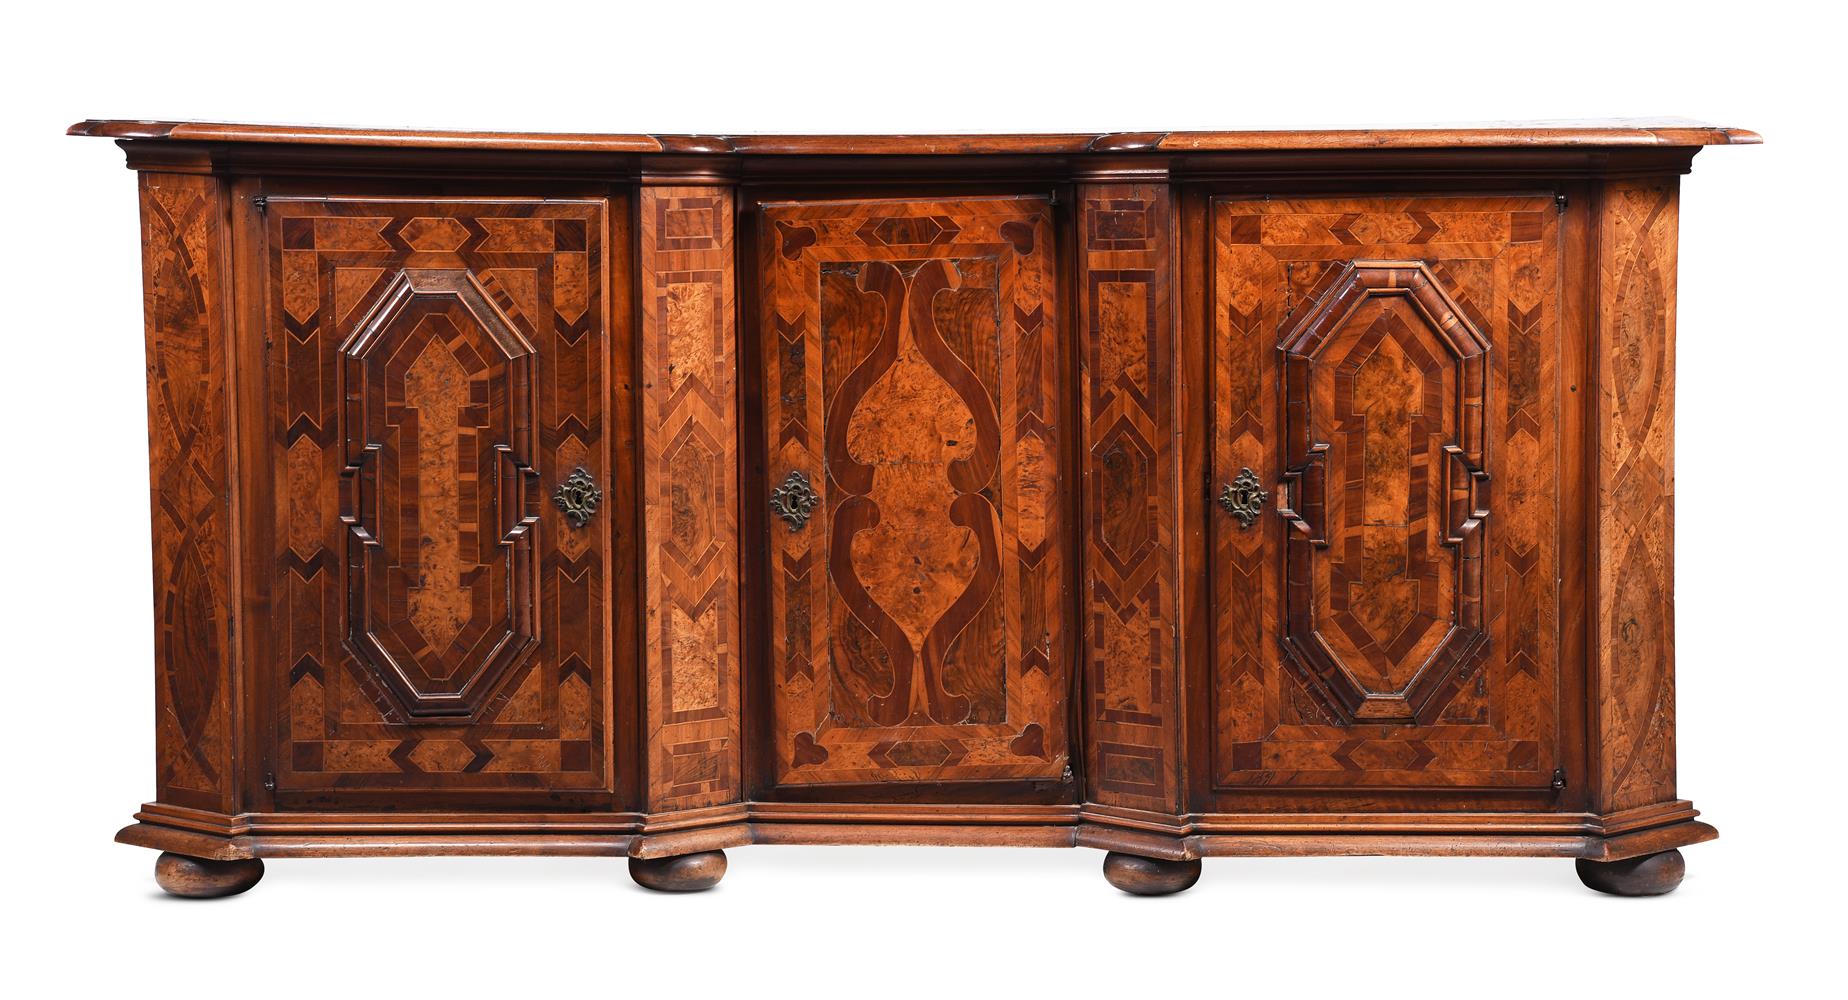 A SWISS WALNUT, BURR WALNUT AND FRUITWOOD BREAKFRONT SIDE CABINET, THIRD QUARTER 18TH CENTURY - Image 2 of 6